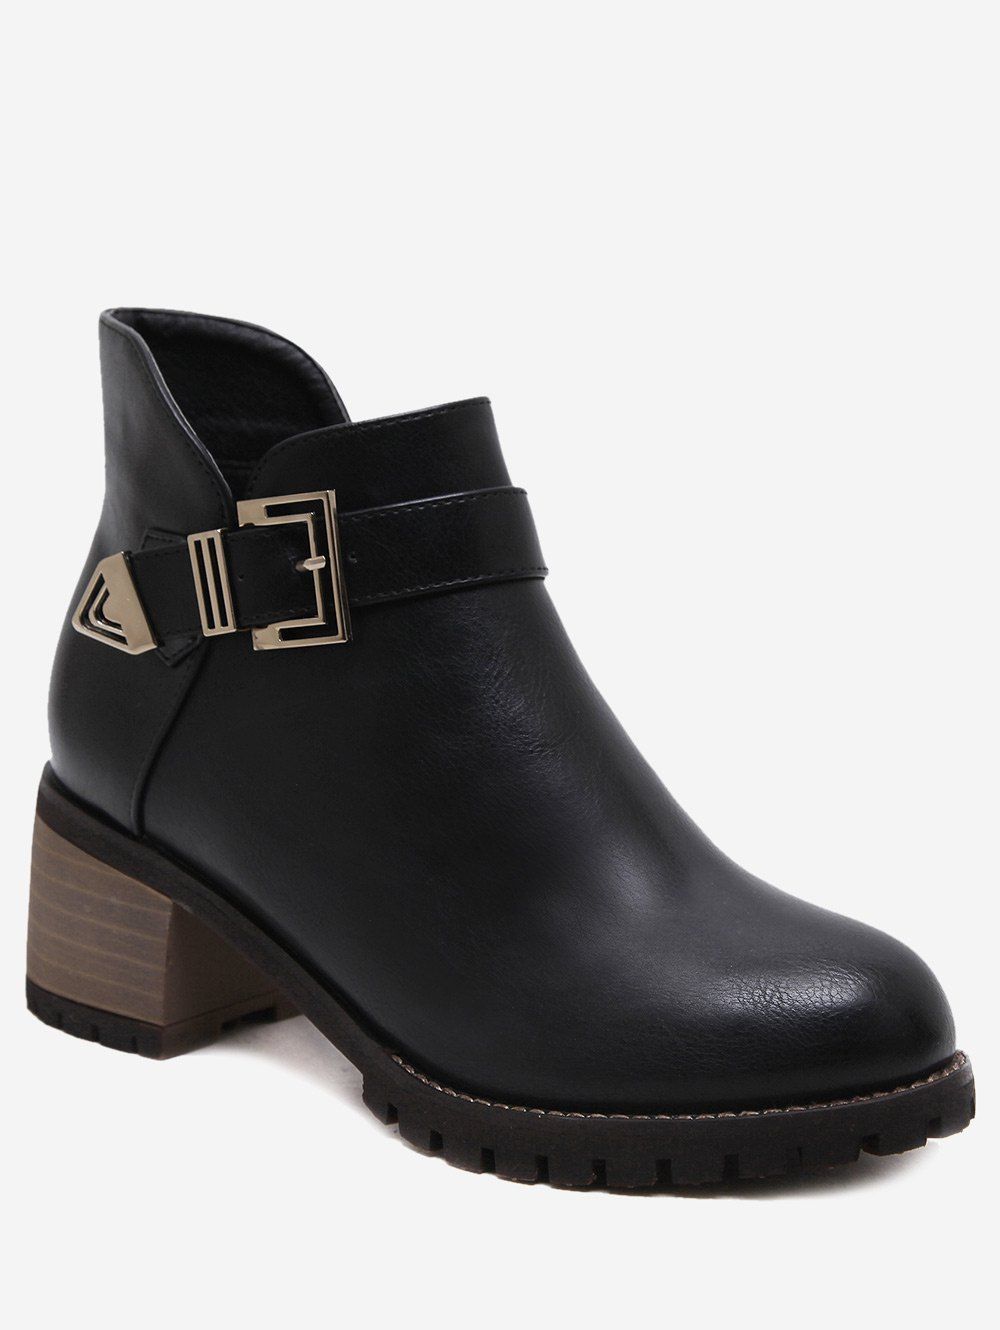 Chunky Heel Buckled Side Zip Ankle Boots - BLACK 38